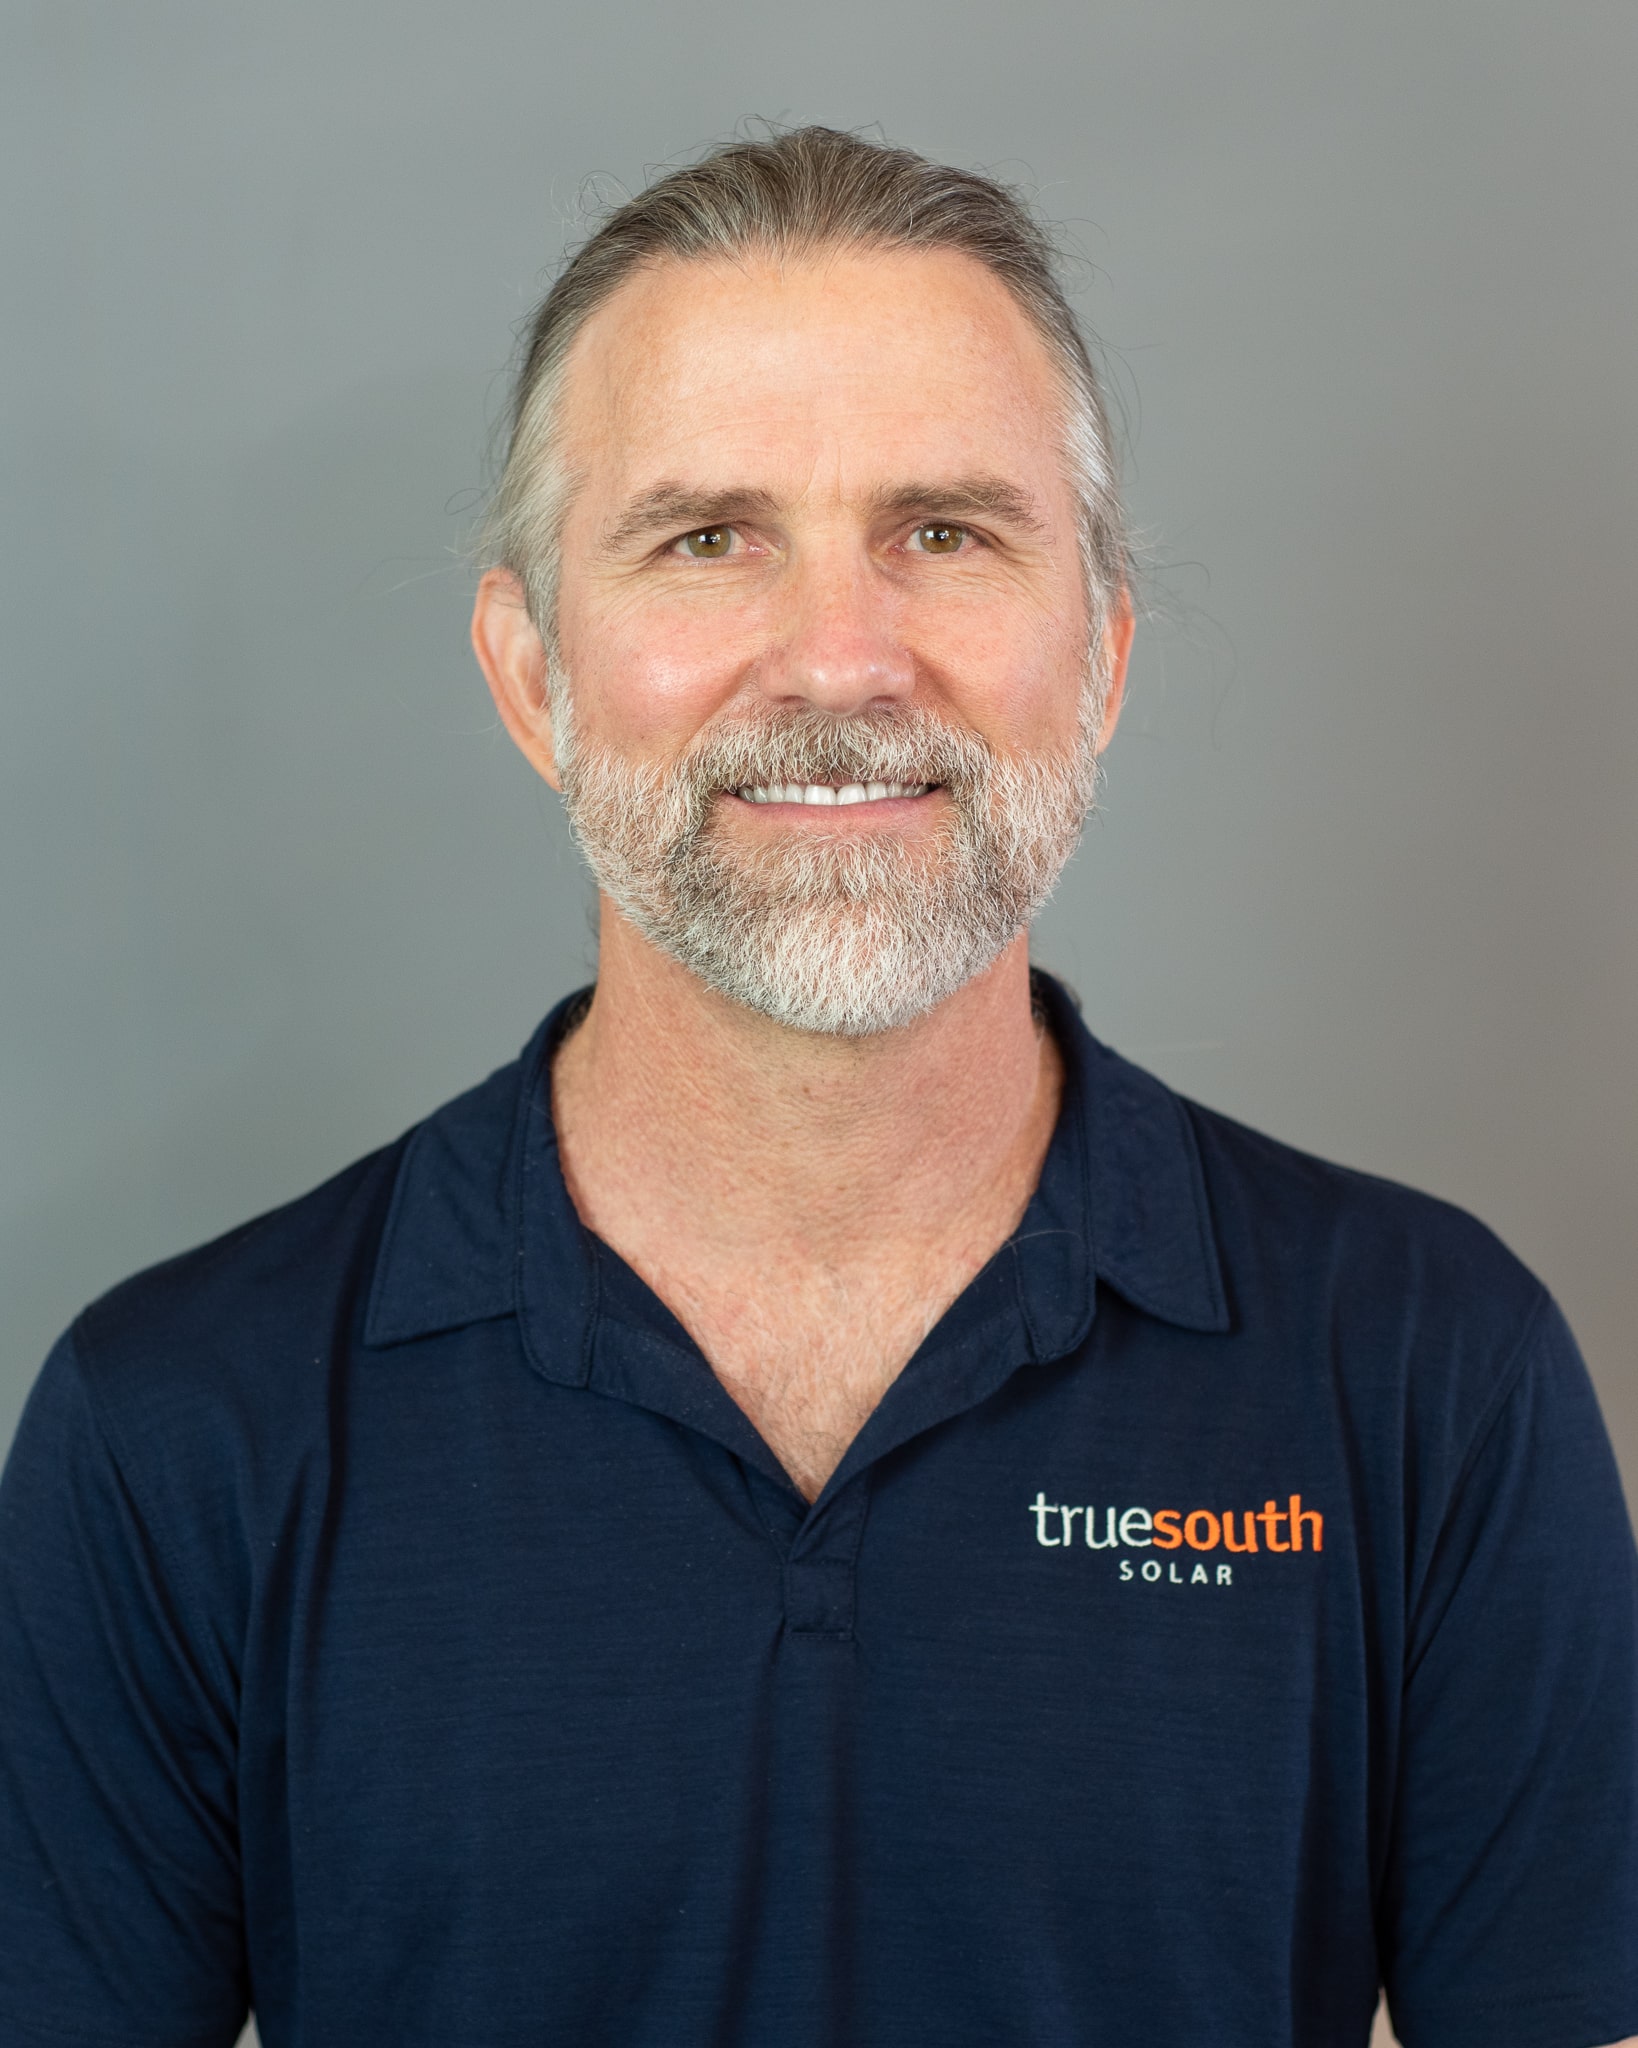 Shawn Schreiner, True South Solar Technical Sales Advisor. We are your local solar experts.